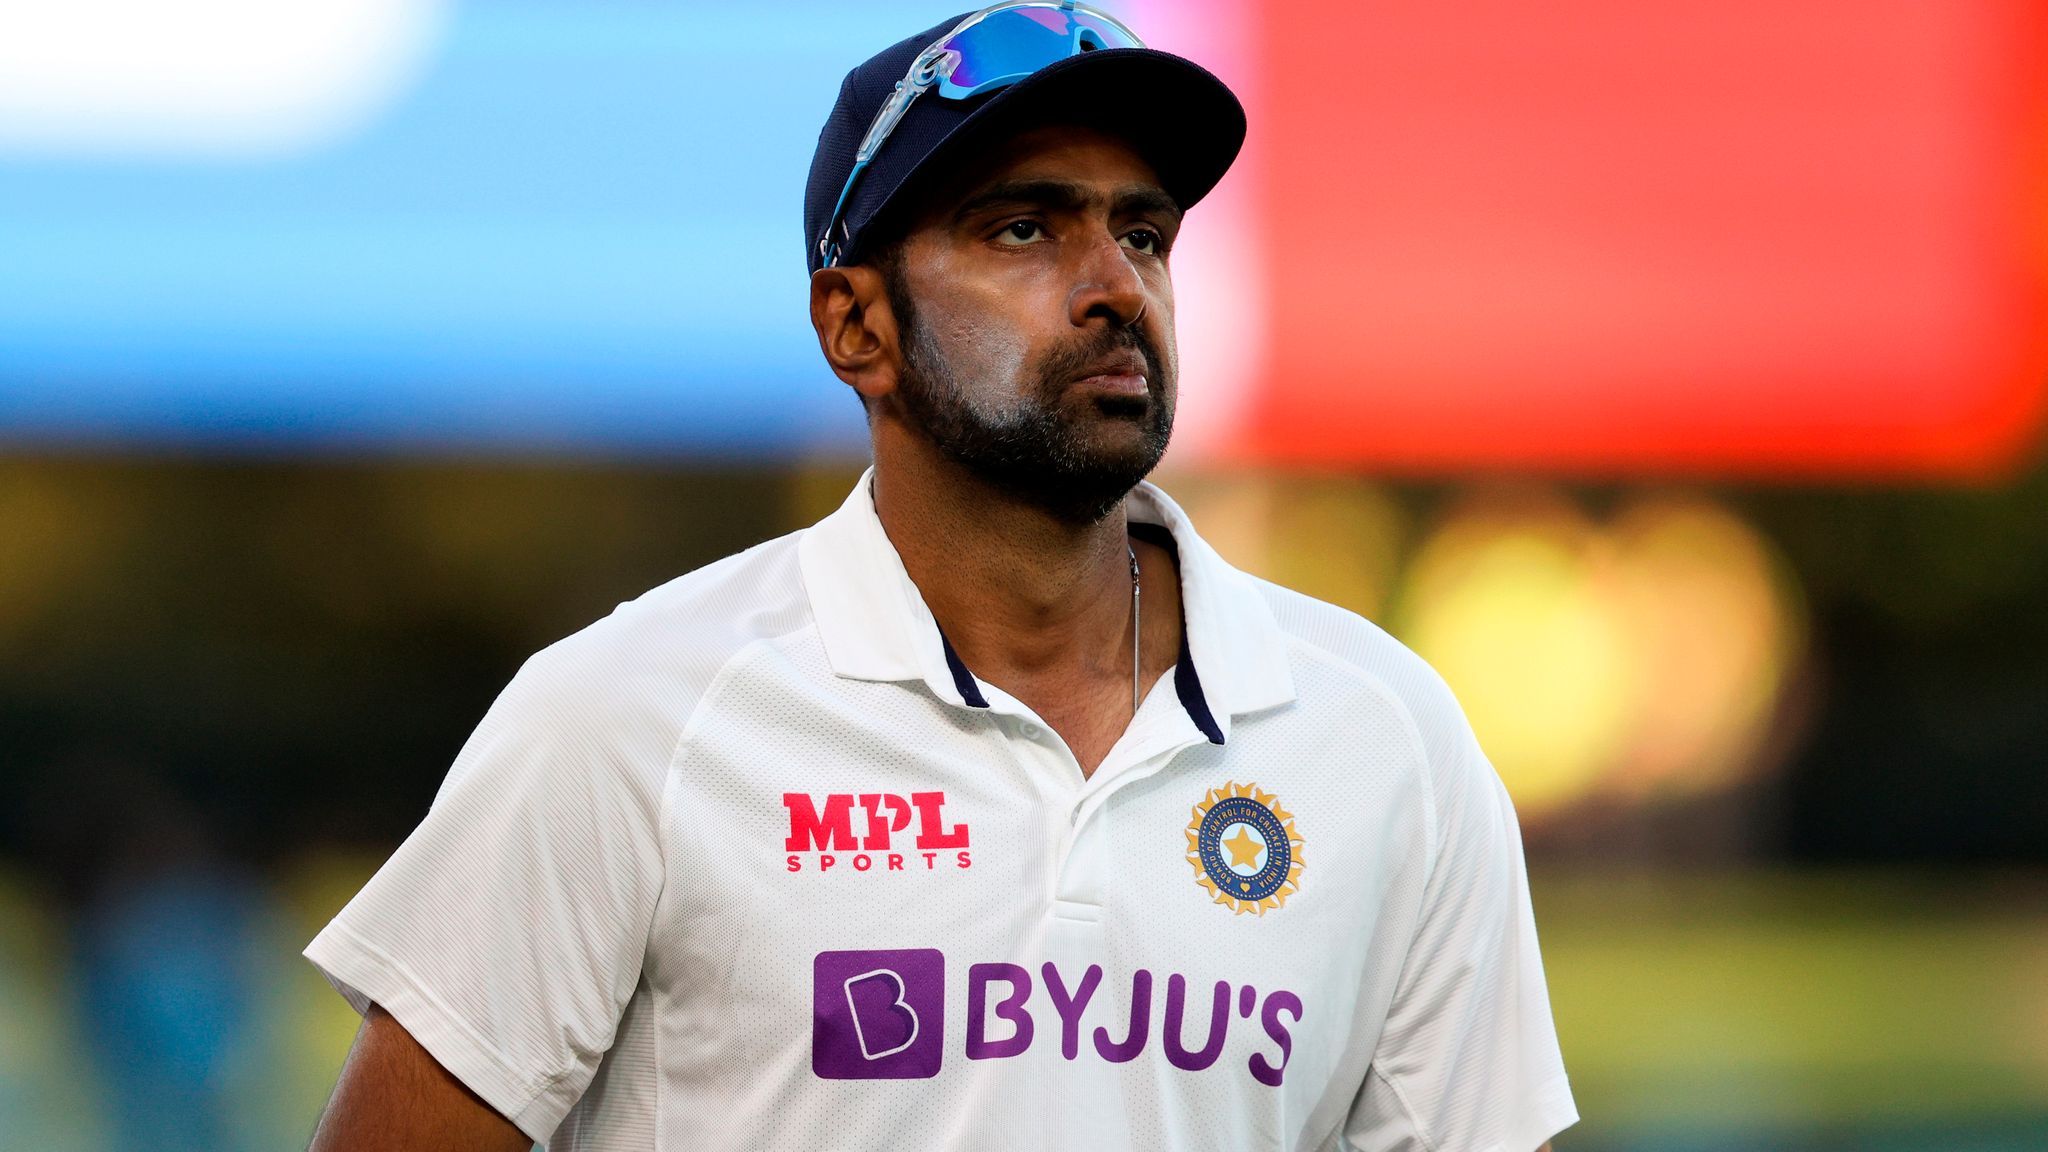 Kohli hints at Ashwin’s inclusion in playing XI for Leeds Test